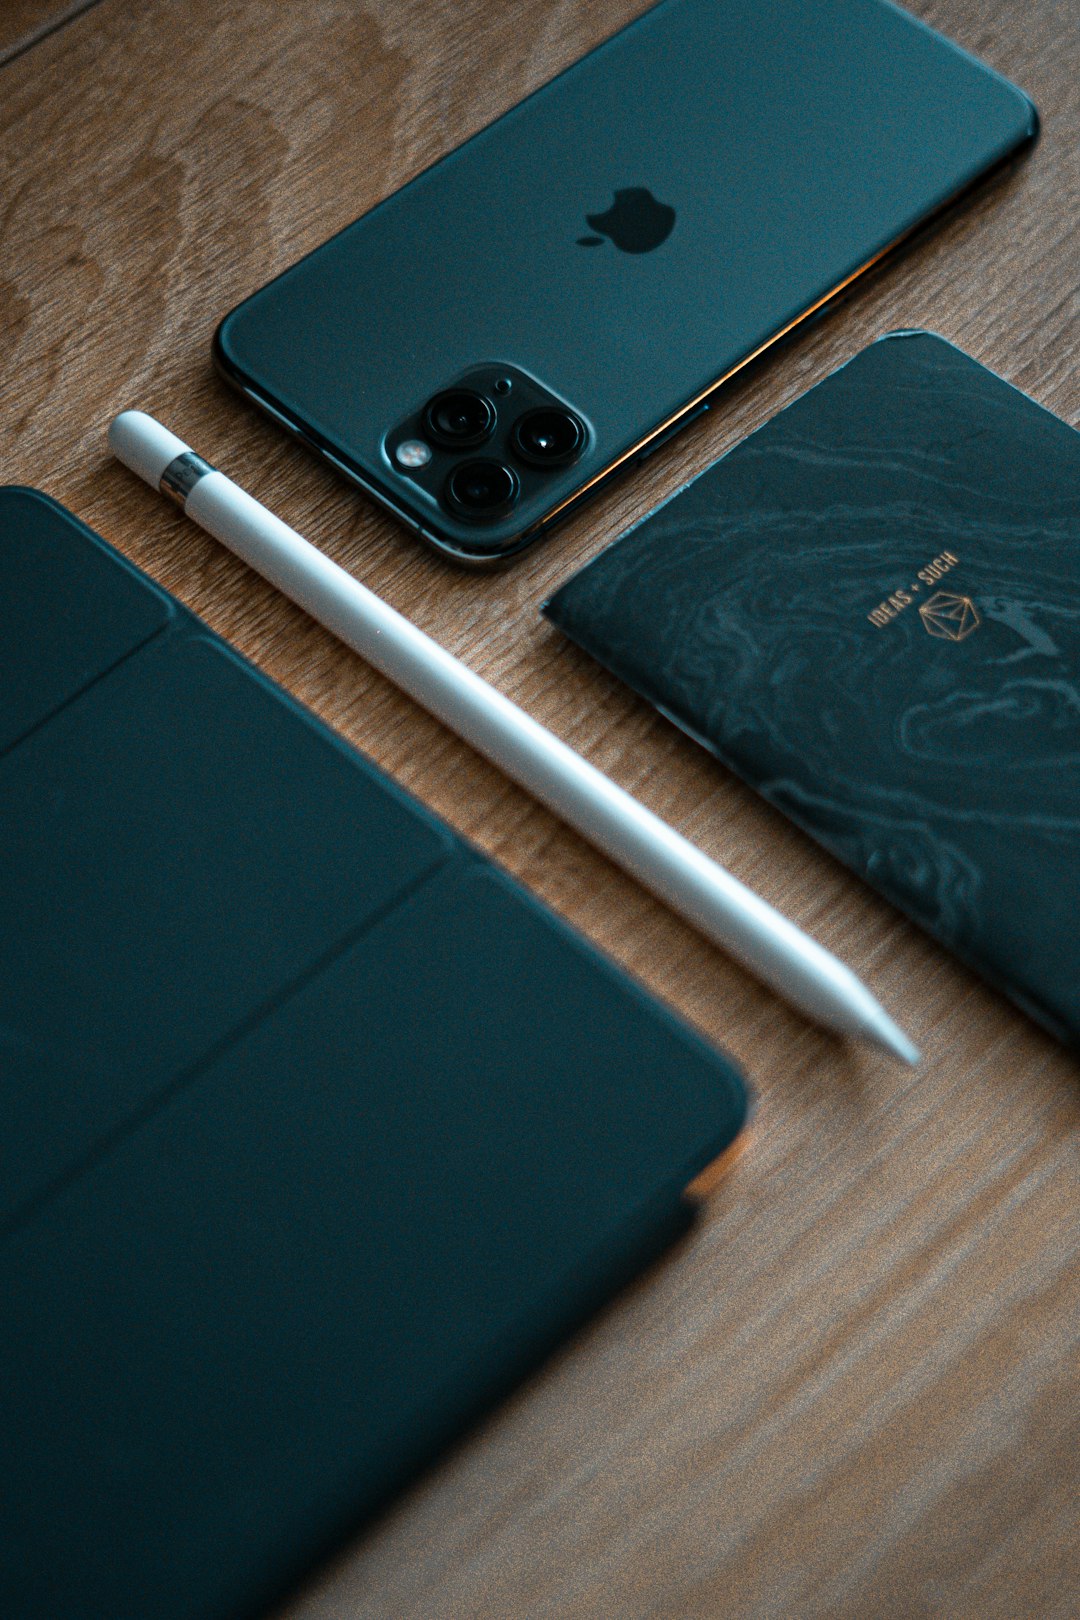 white stylus pen beside space gray iPhone 11 Pro and passbook